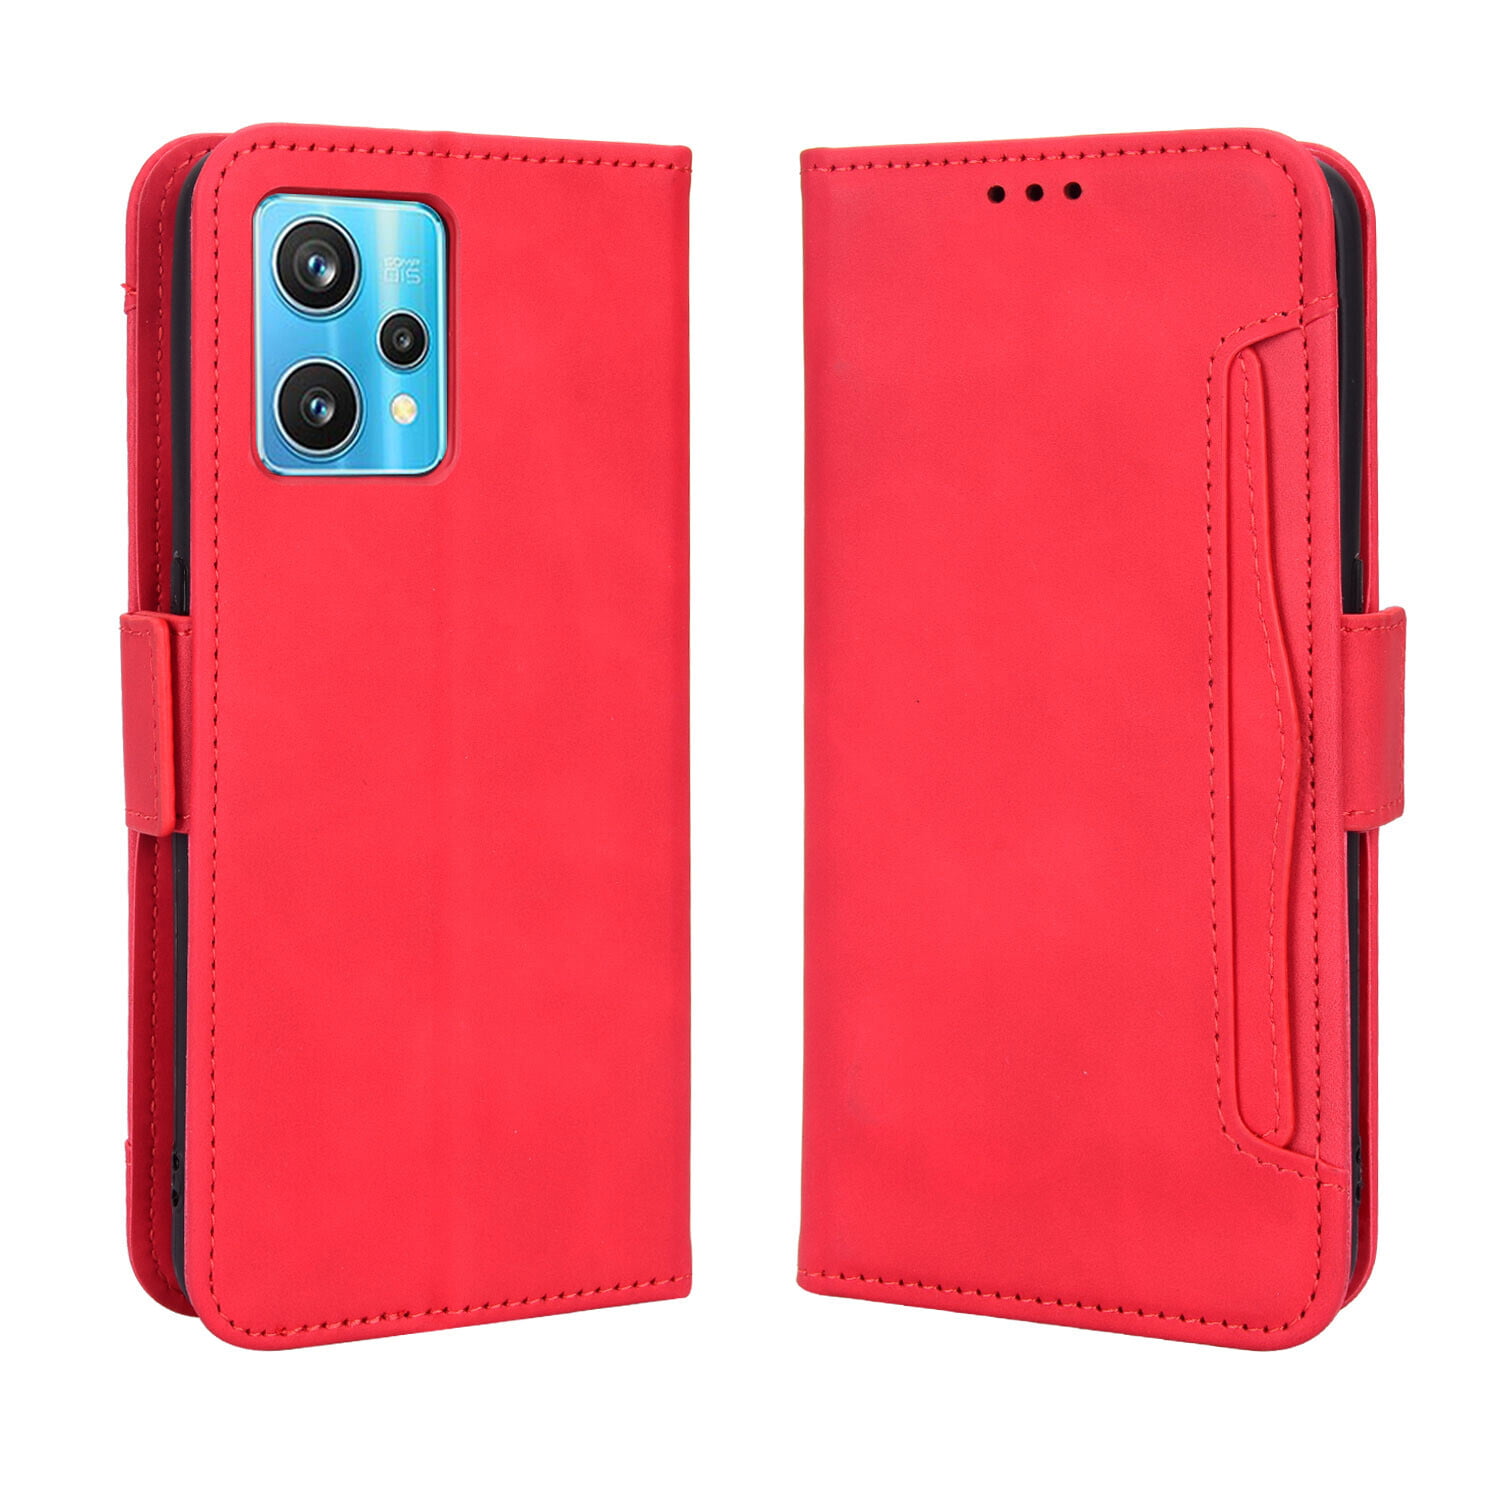 Business Cloth Leather Case for OnePlus Nord 2 2T CE 2 Nord N10